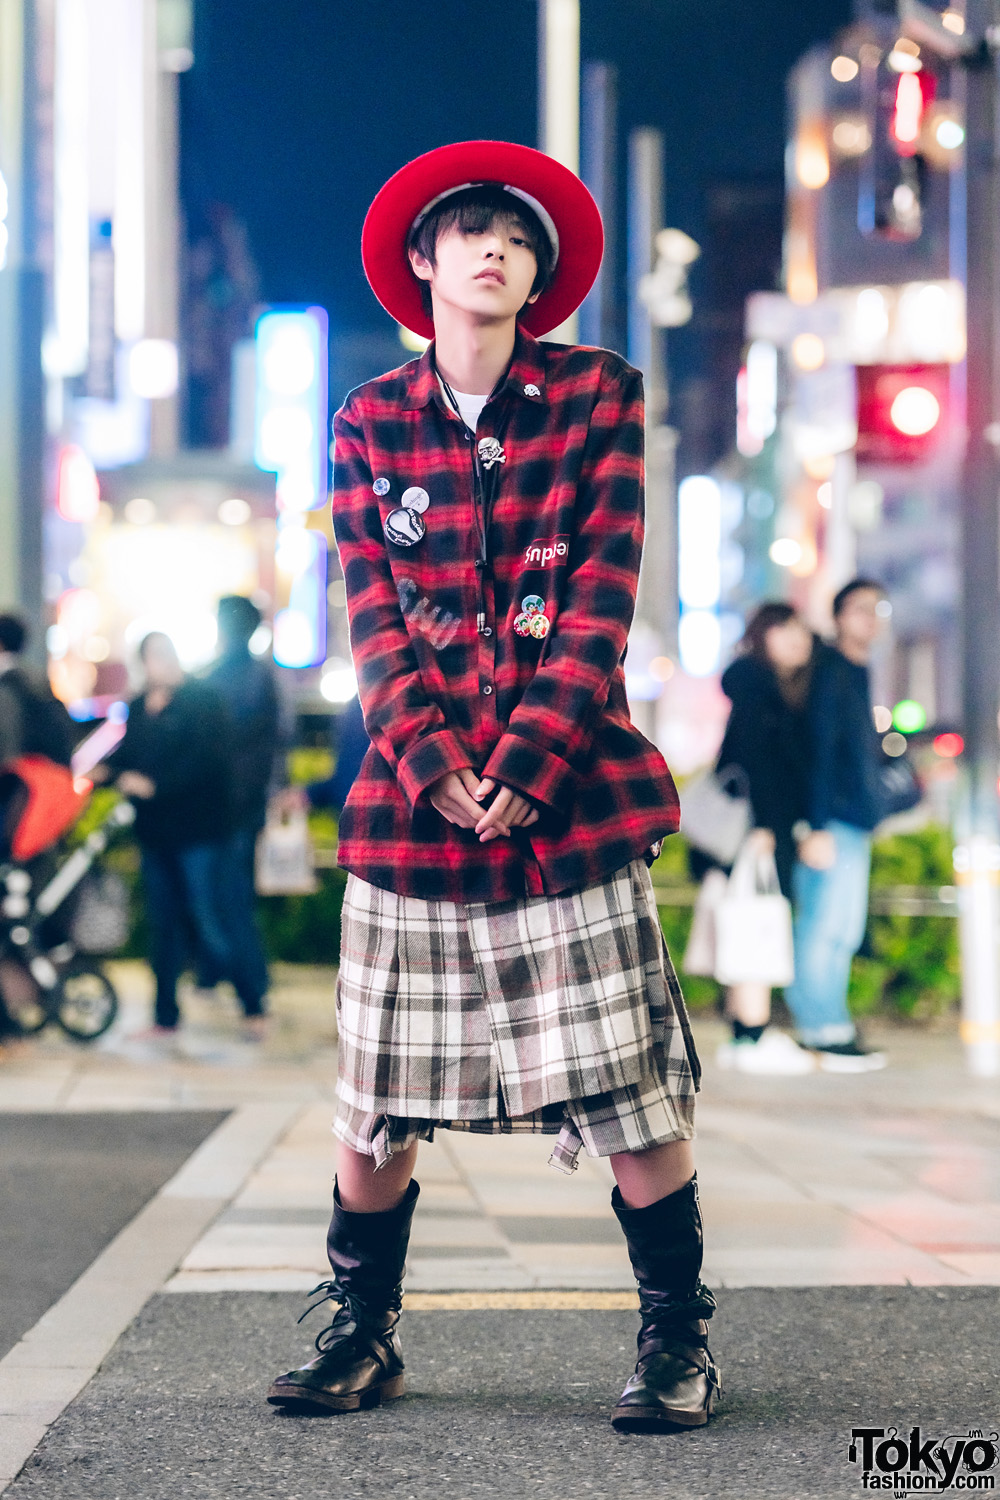 Red-and-Black Street Style w/ Red Hat, Plaid Outfit & Undercover Black Boots